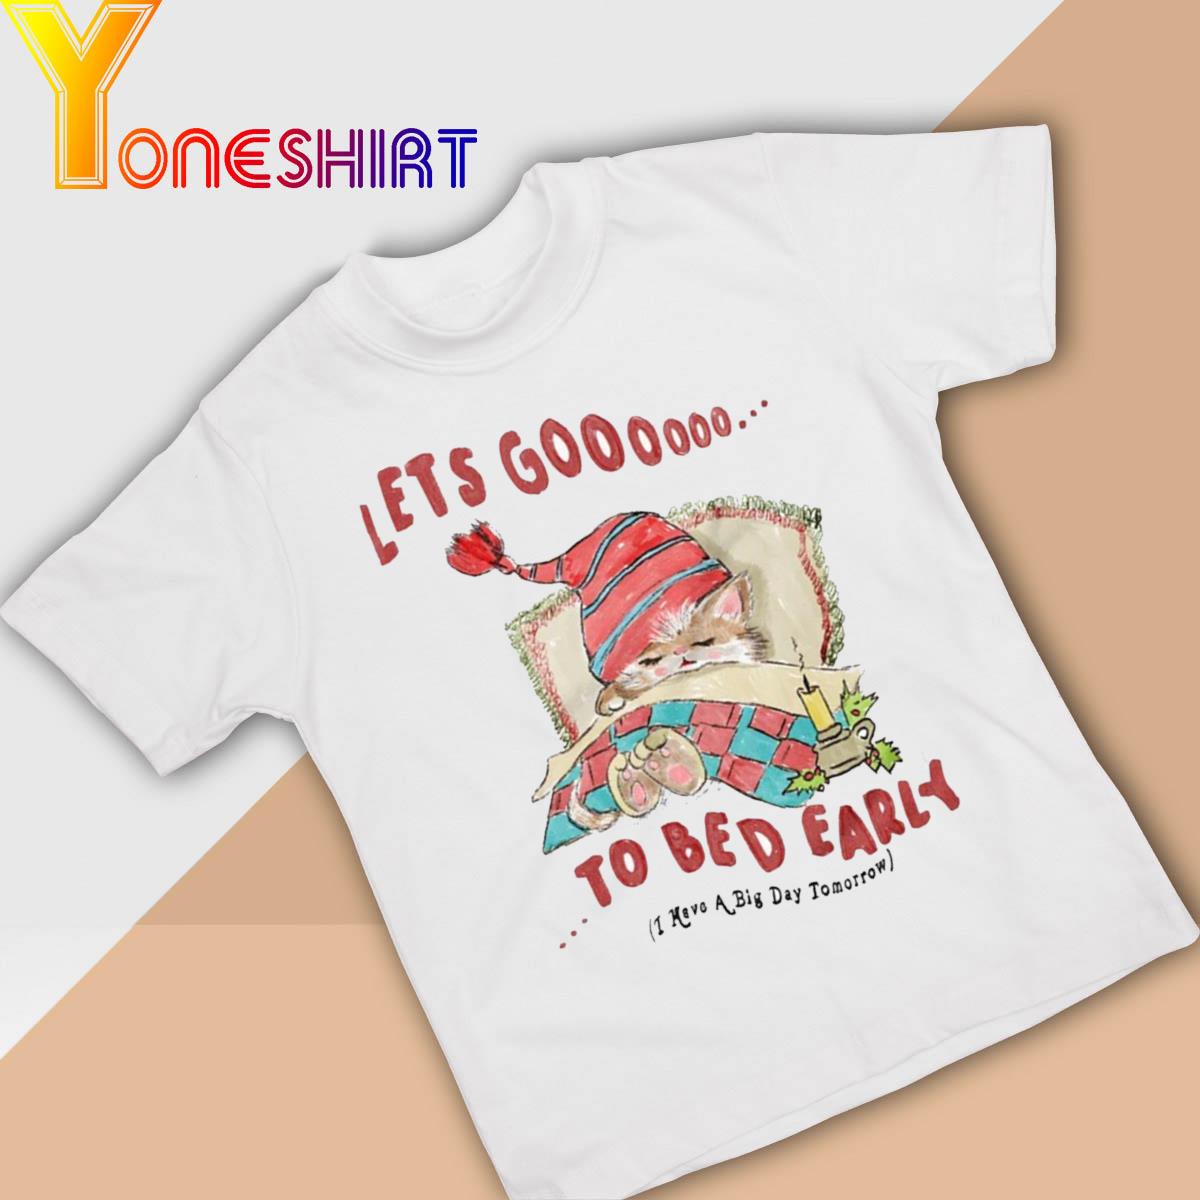 Lets Go to Bed Early shirt